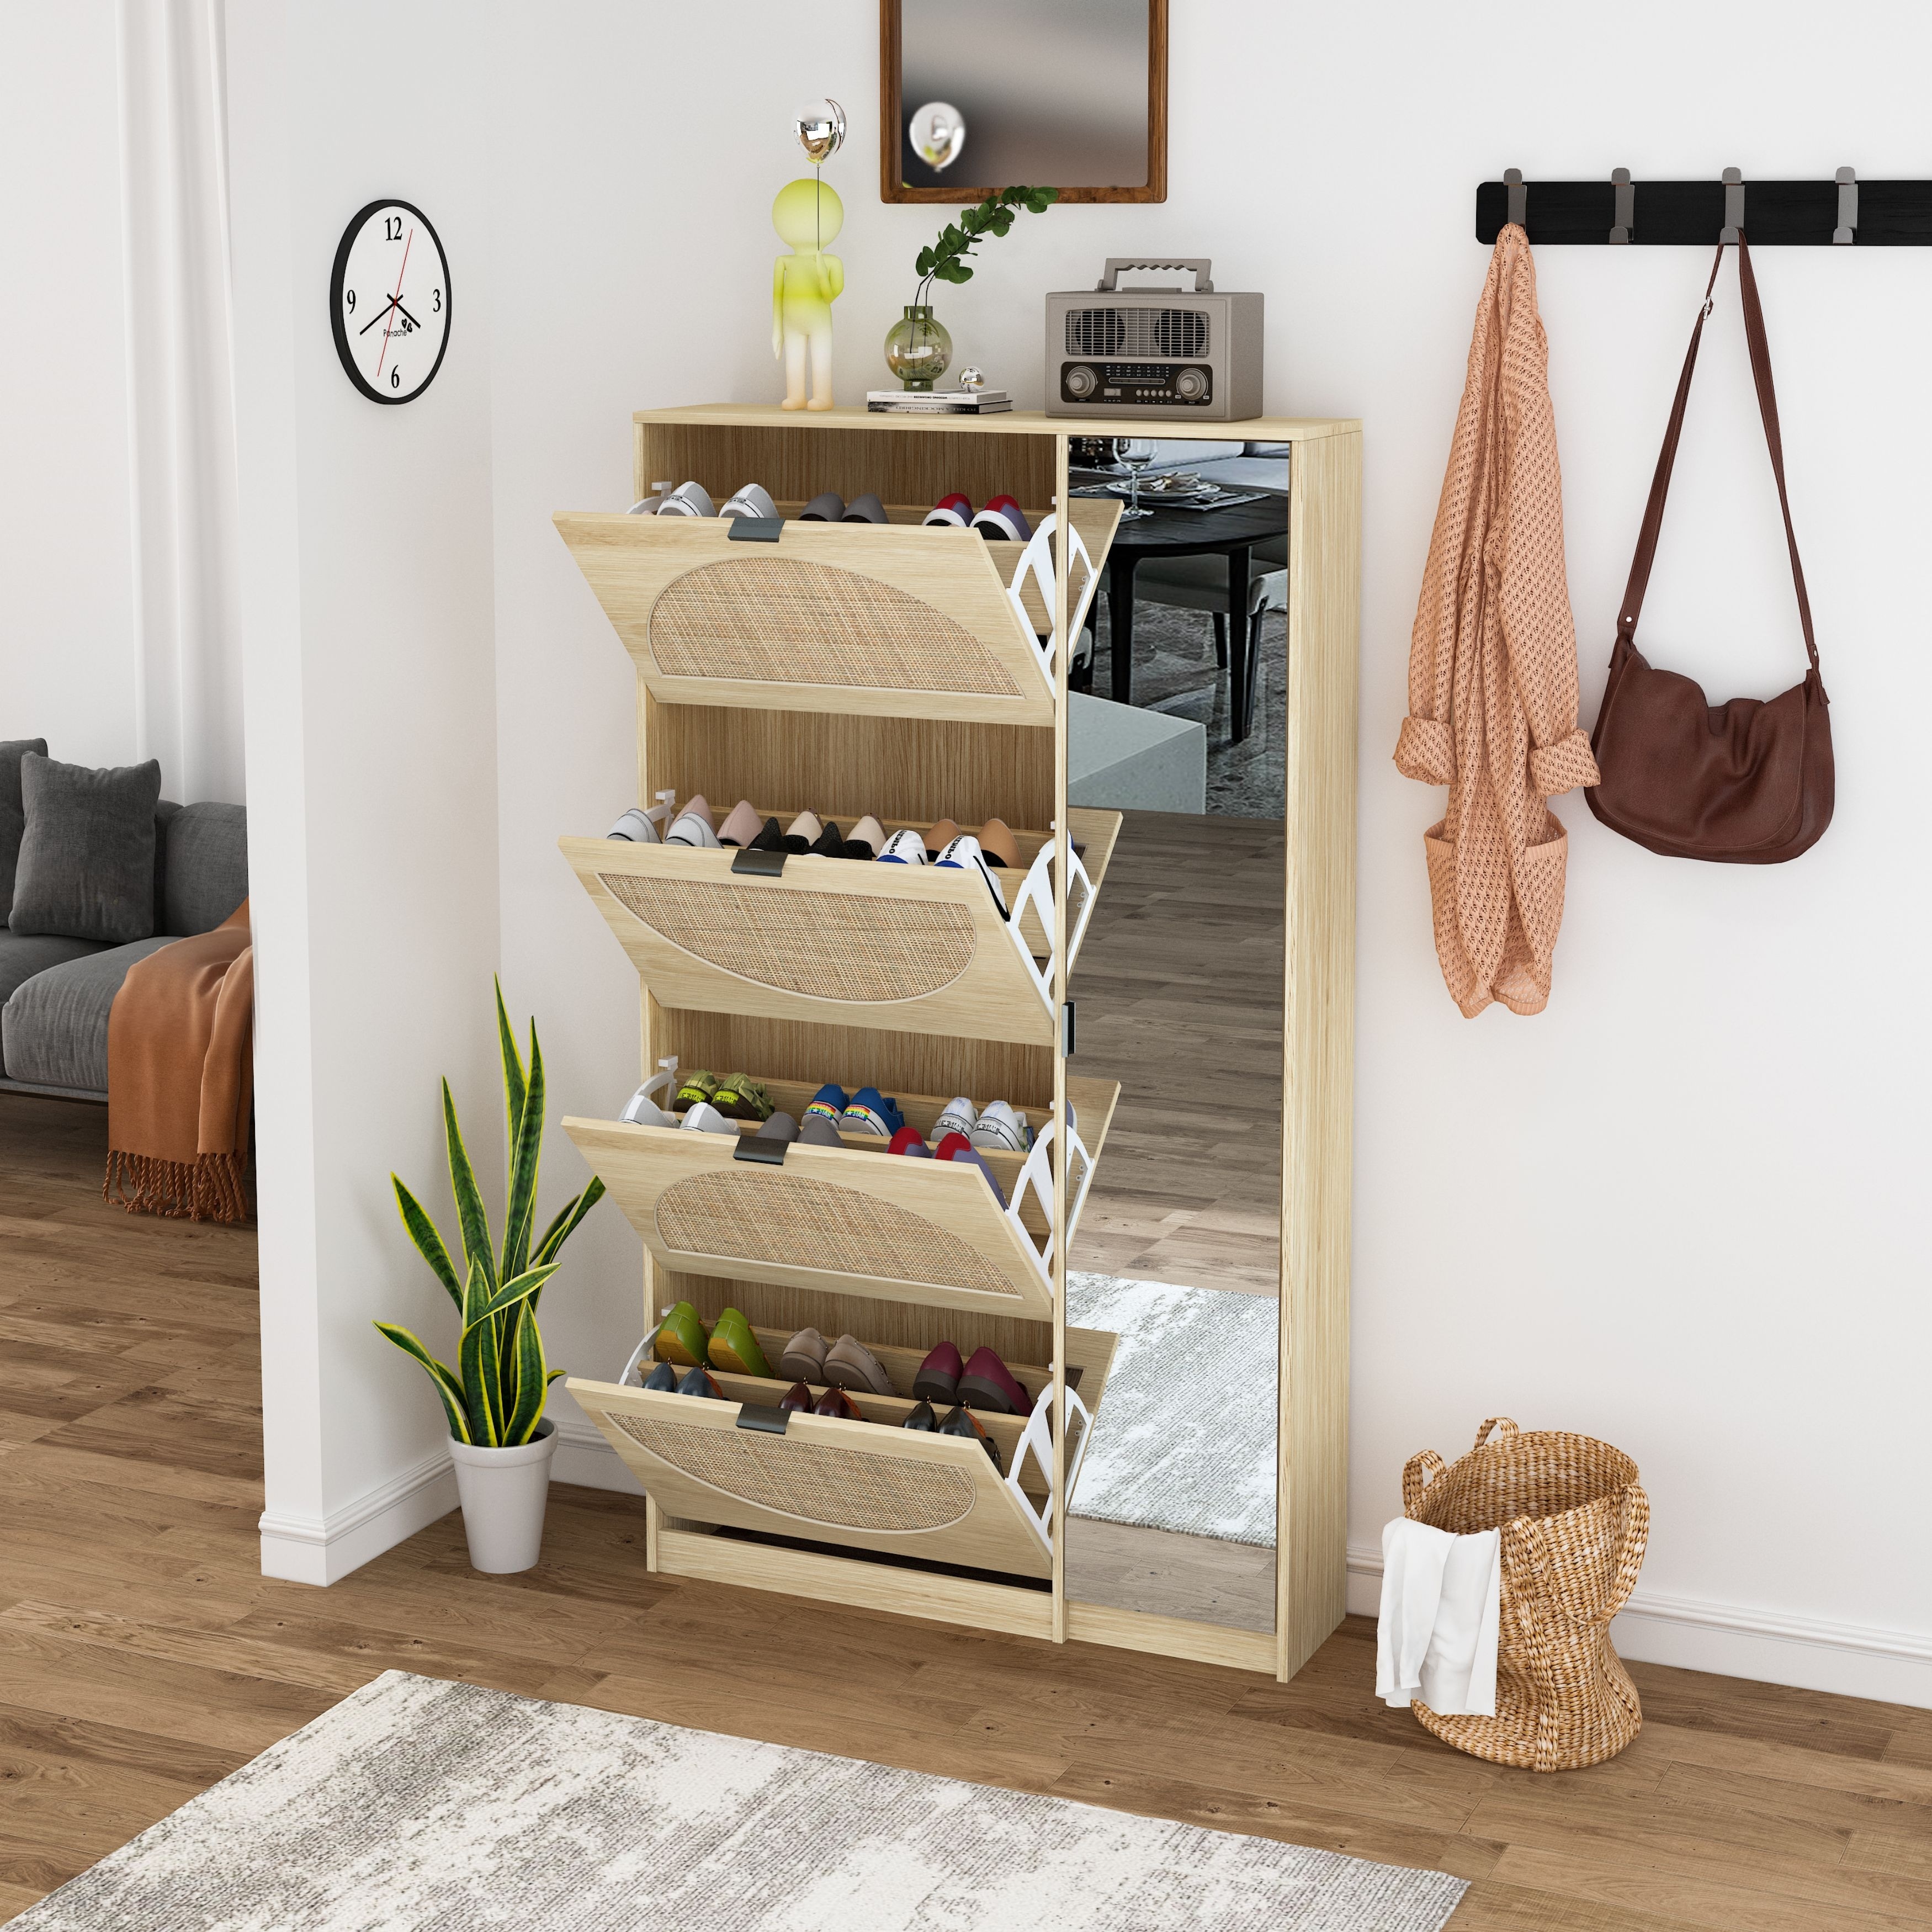 https://ak1.ostkcdn.com/images/products/is/images/direct/908812cb99fe2c5e3e1ae8dfebaf71474fadc102/Natural-Rattan-Shoe-Cabinet-with-4-Tier-Shoe-Rack-Storage-Cabinet.jpg